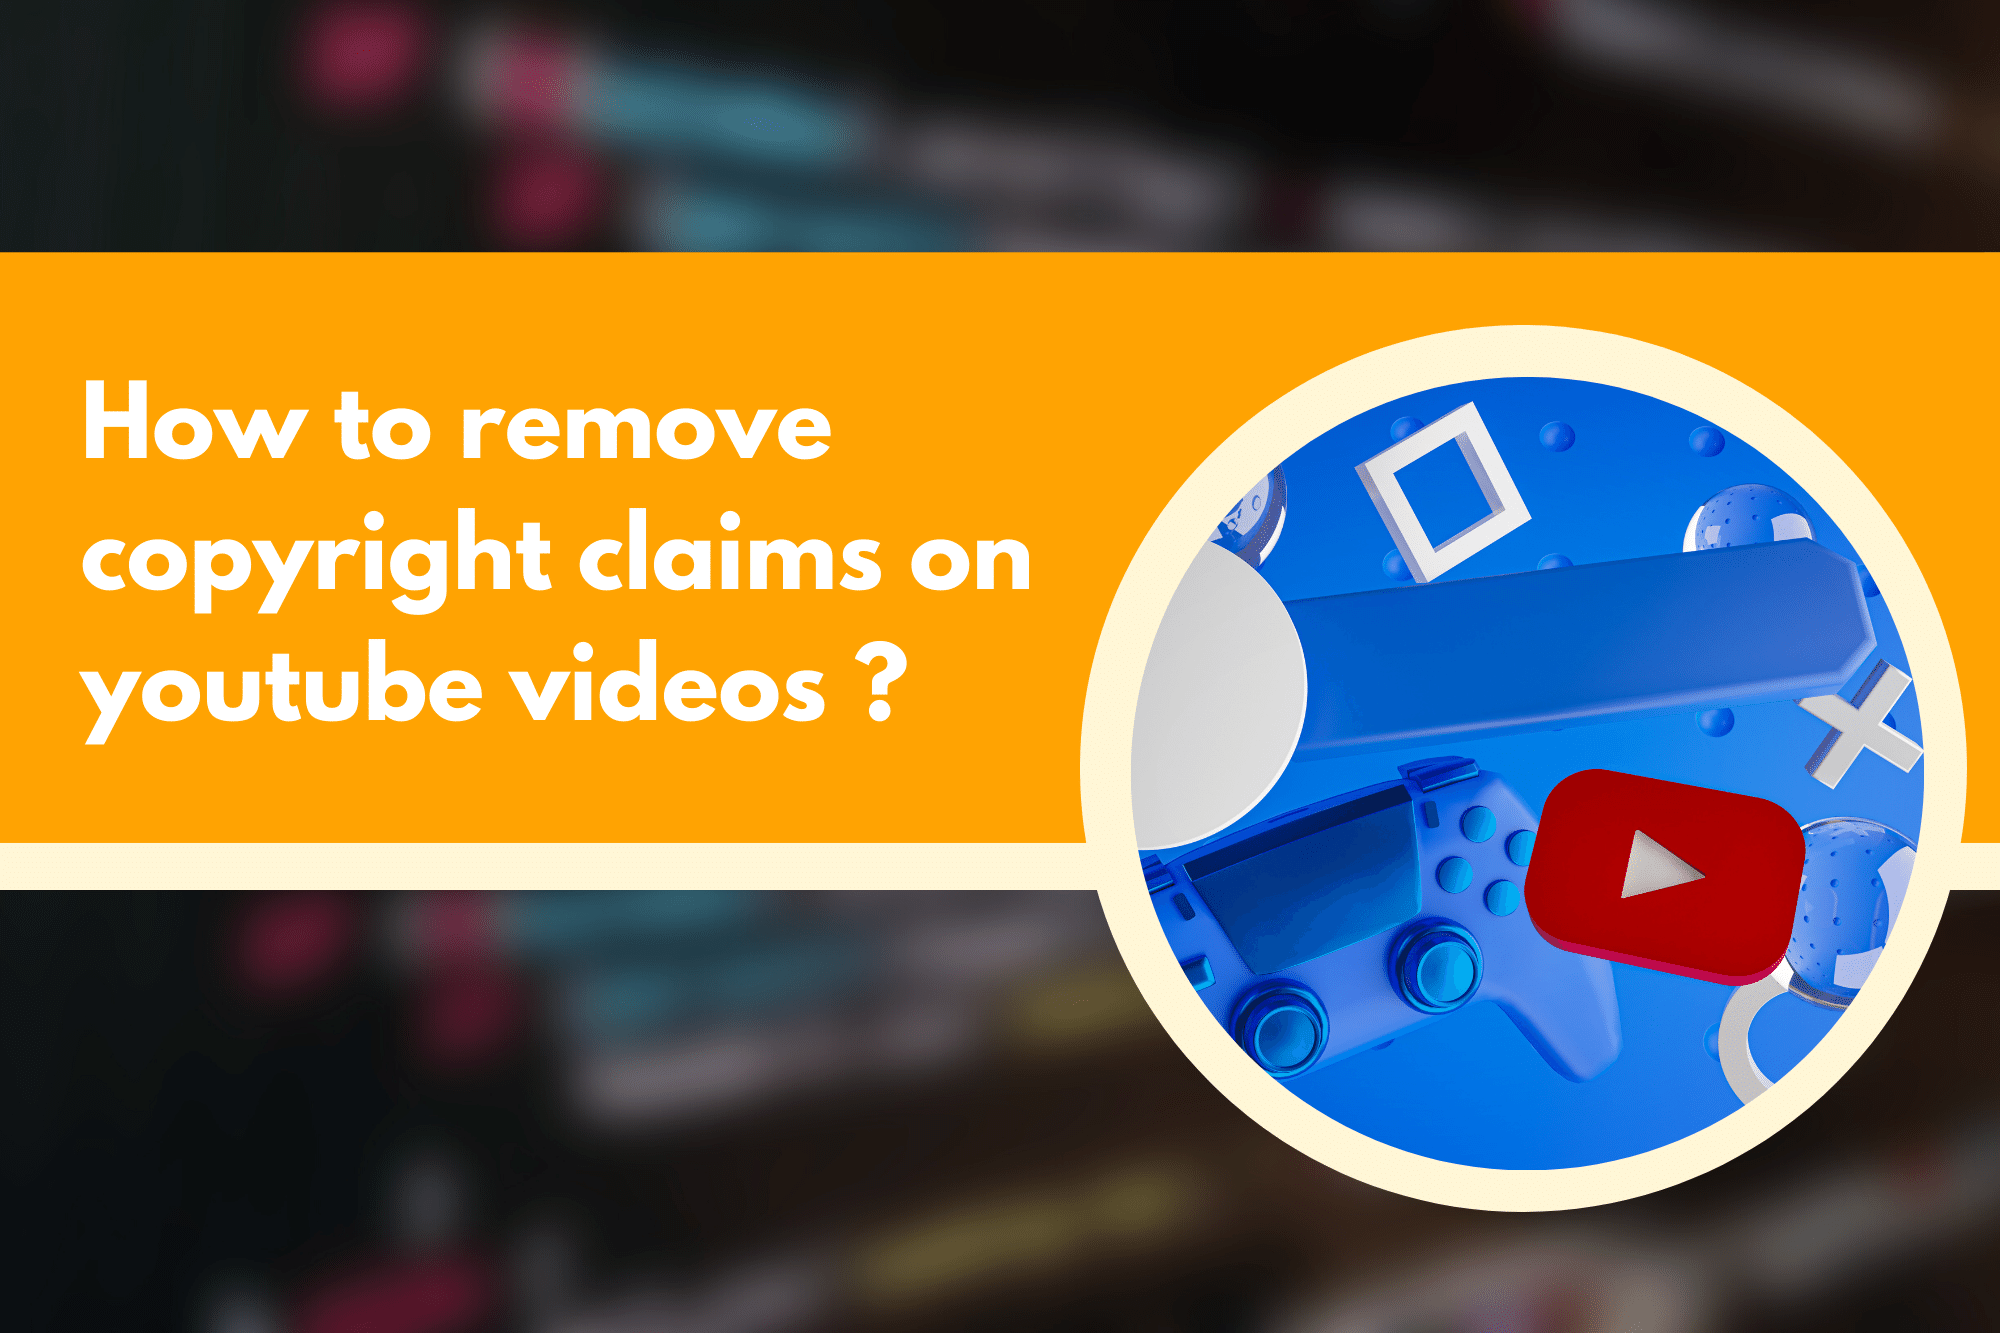 How to remove copyright claims on youtube videos